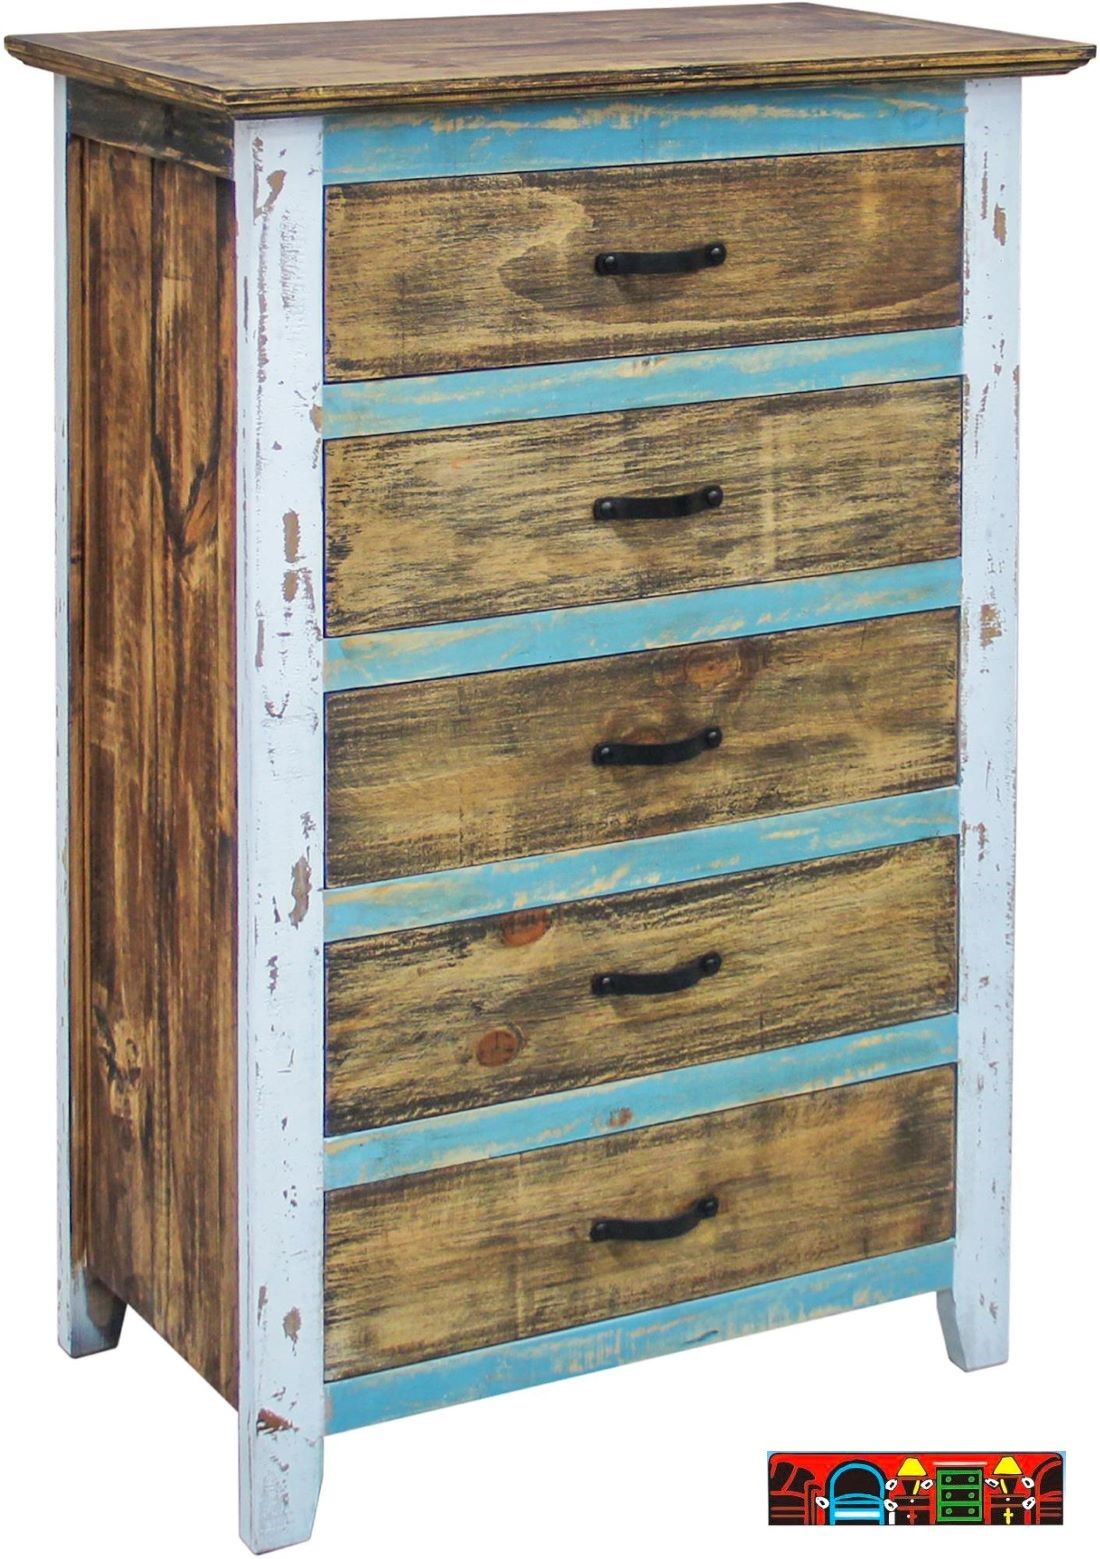 The Cabana Bedroom Chest is crafted from solid wood, featuring a blend of brown, white, and turquoise hues with five drawers featuring curved metal handles.